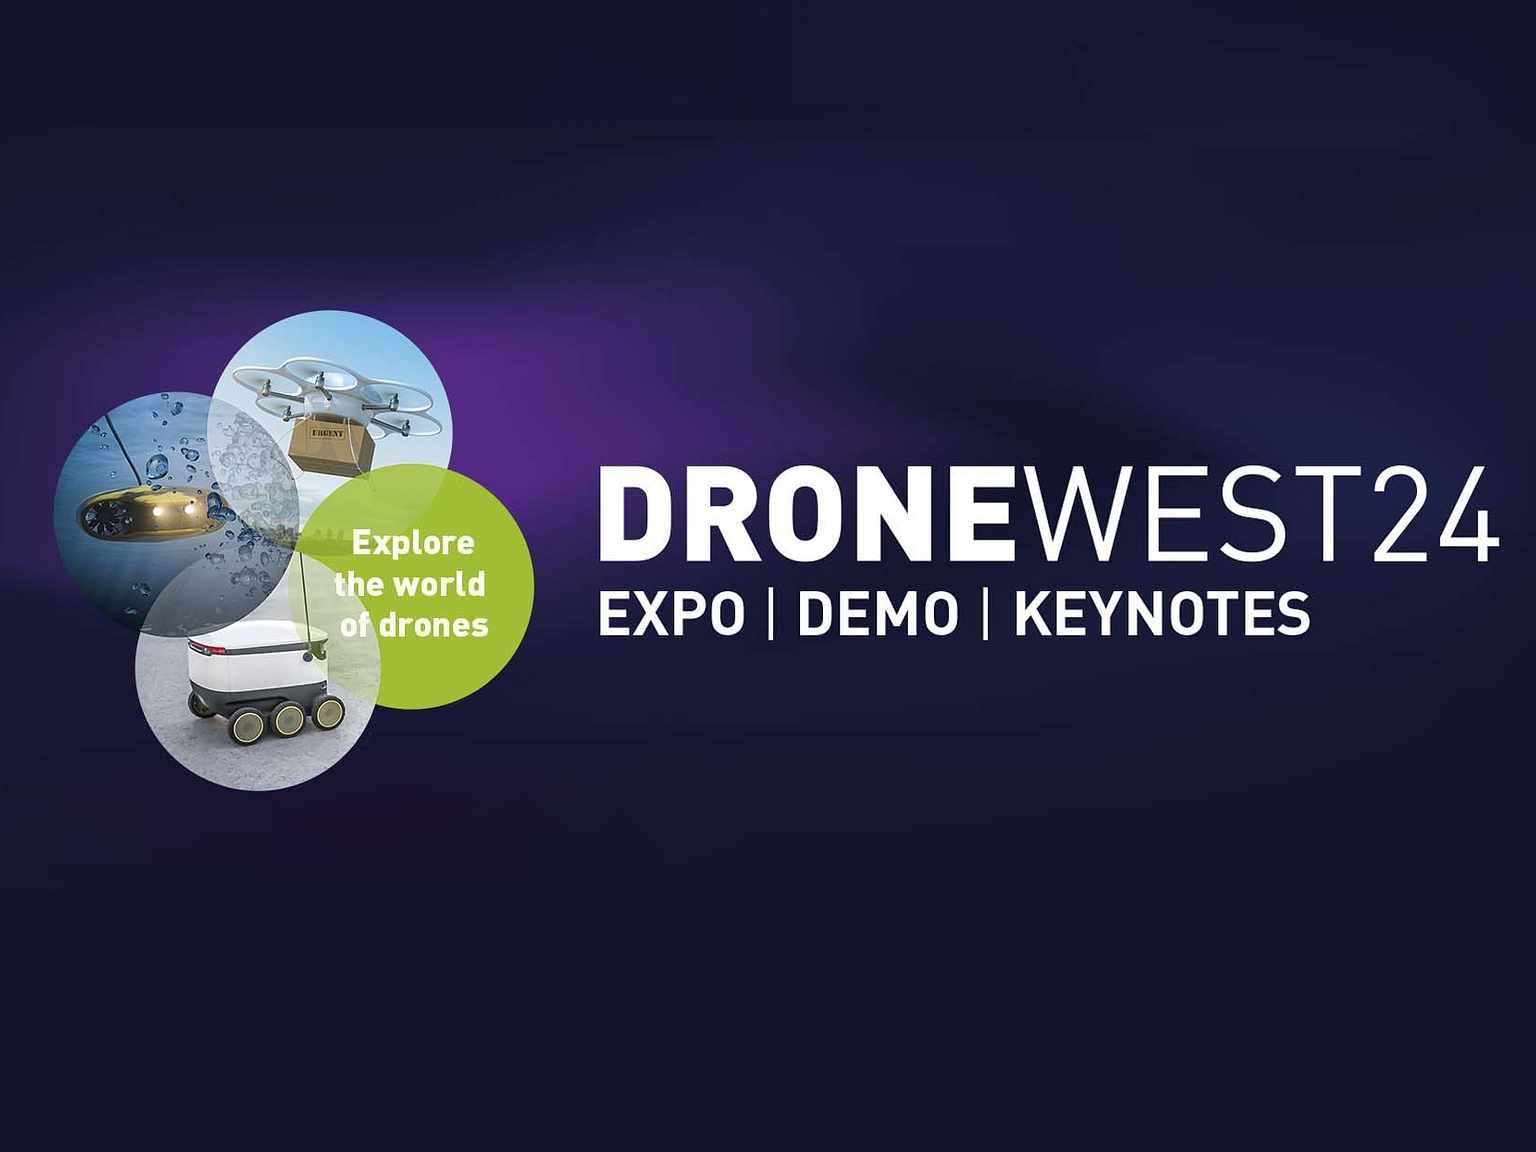 Drone West '24